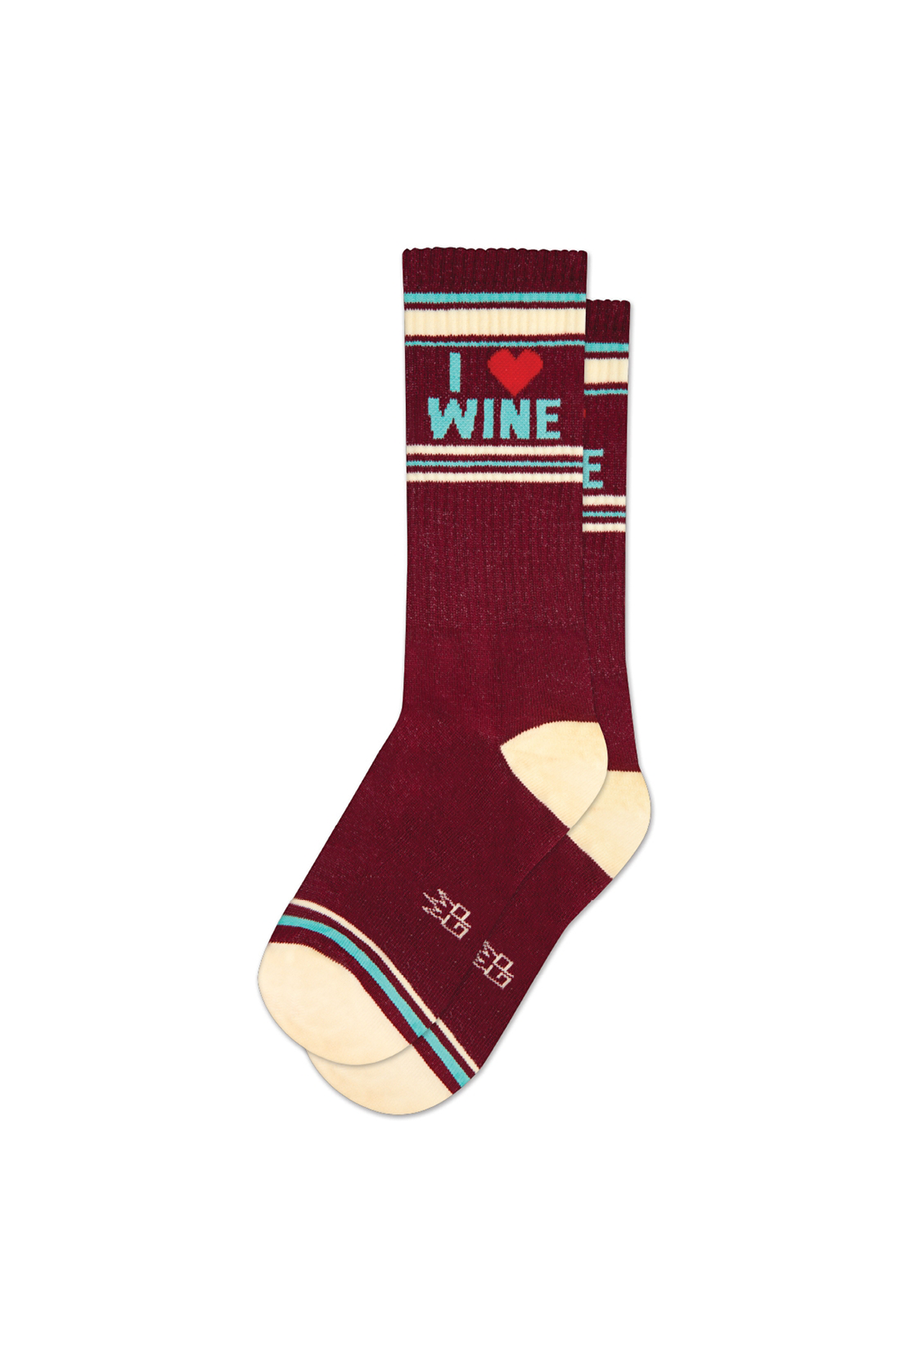 I Heart Wine Ribbed Gym Sock - Main Image Number 1 of 3